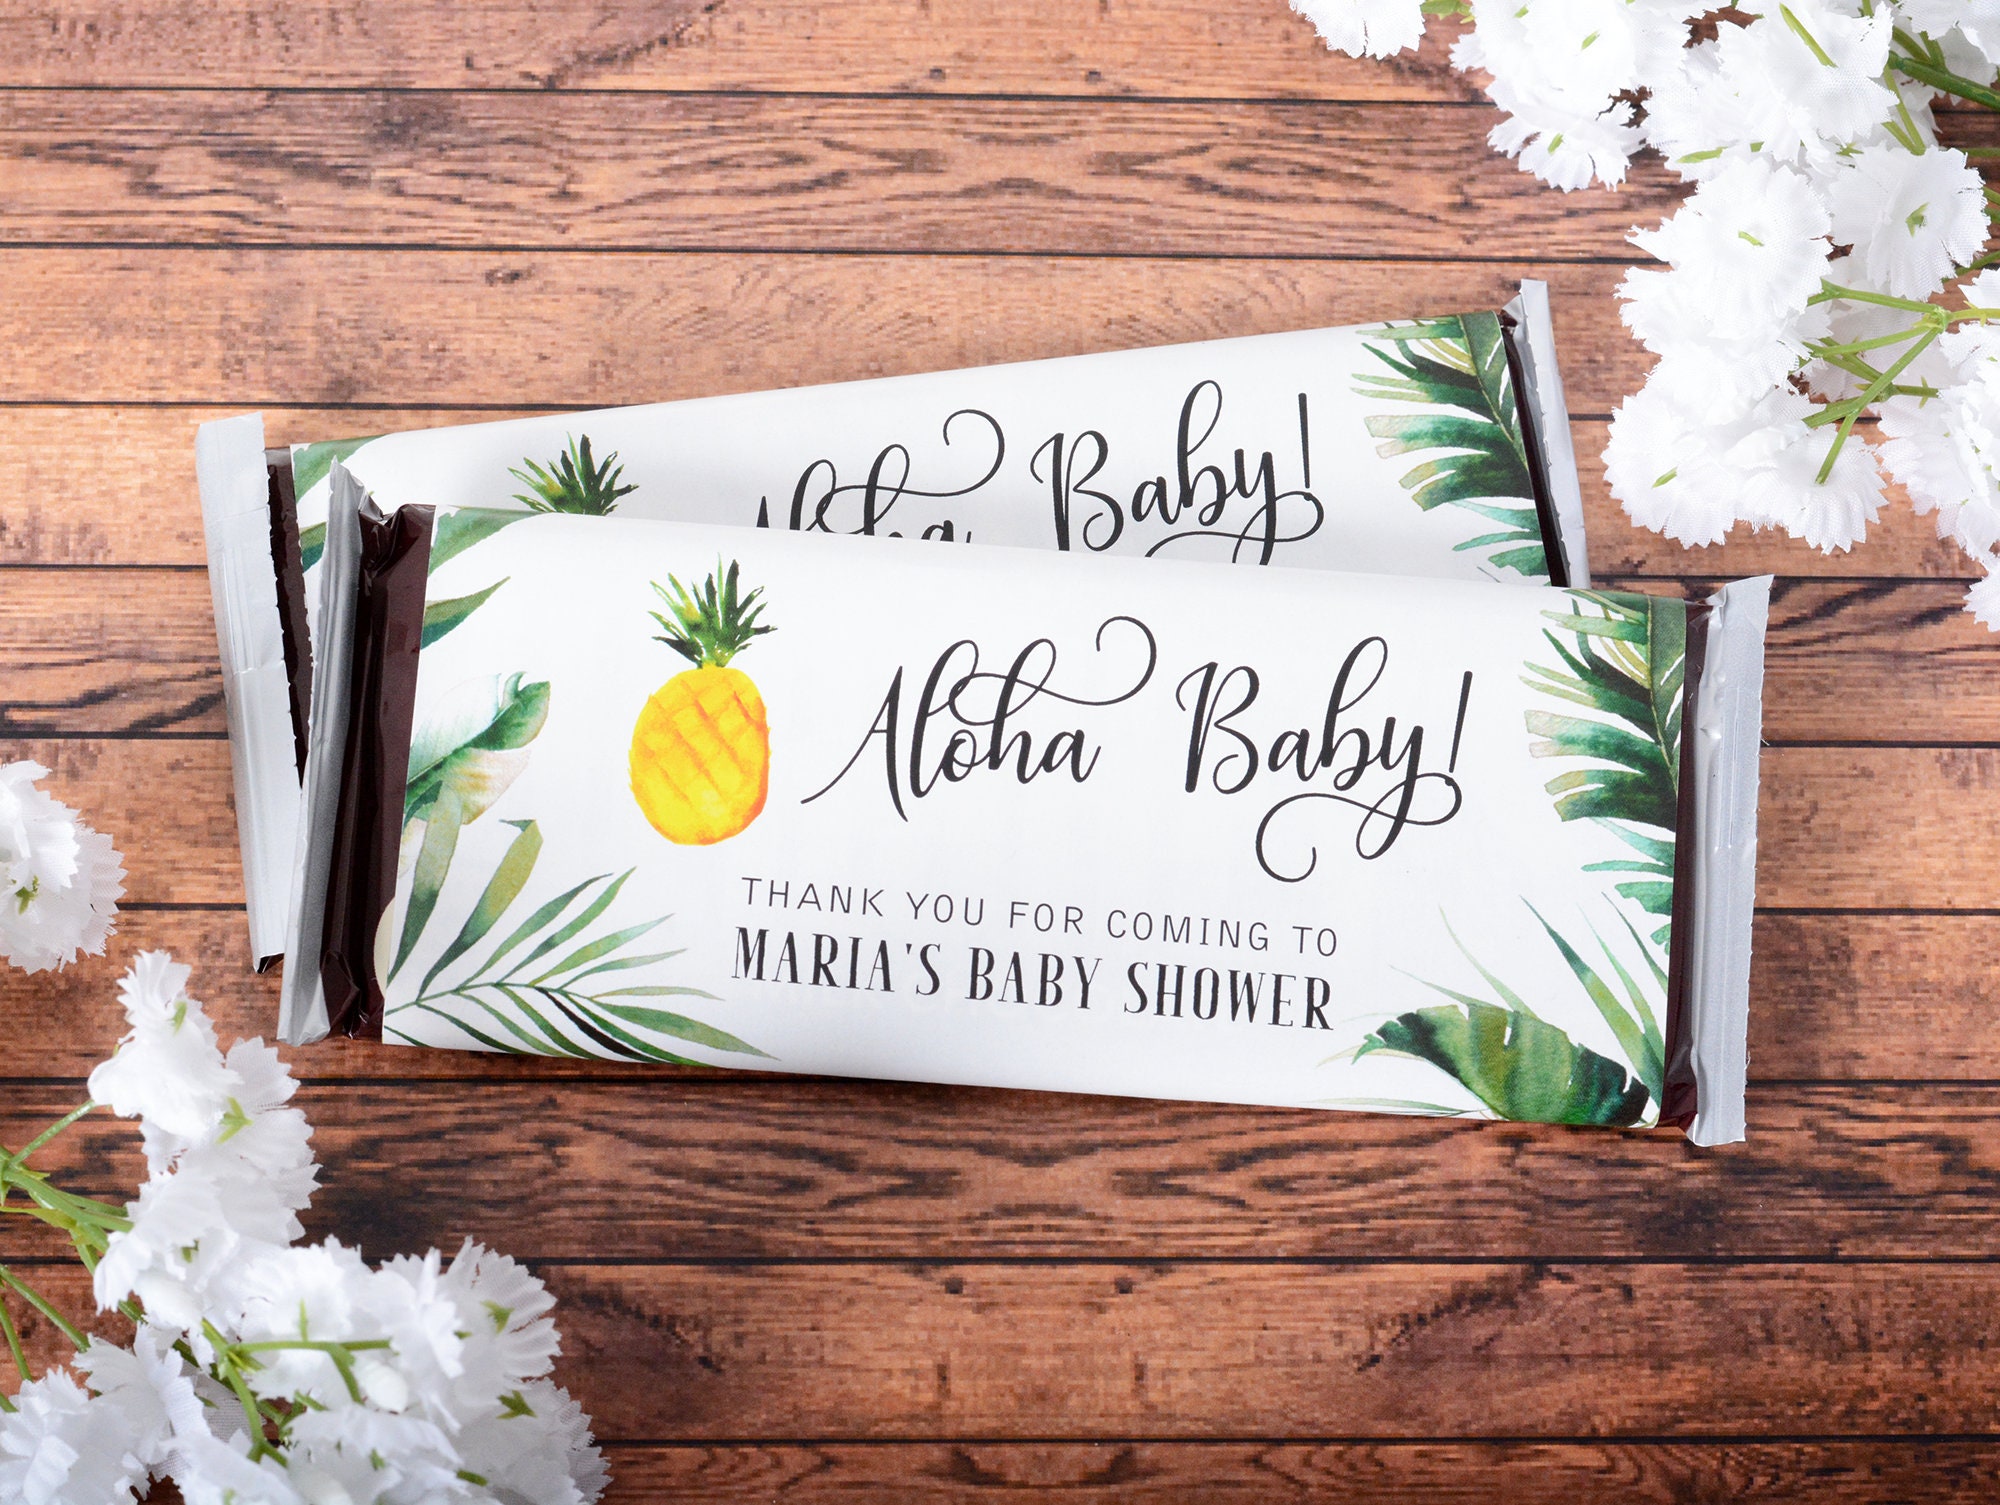 Tropical Candy Bar Wrappers, 25 Baby Shower Chocolate Wraps, Stickers #bsihb-55